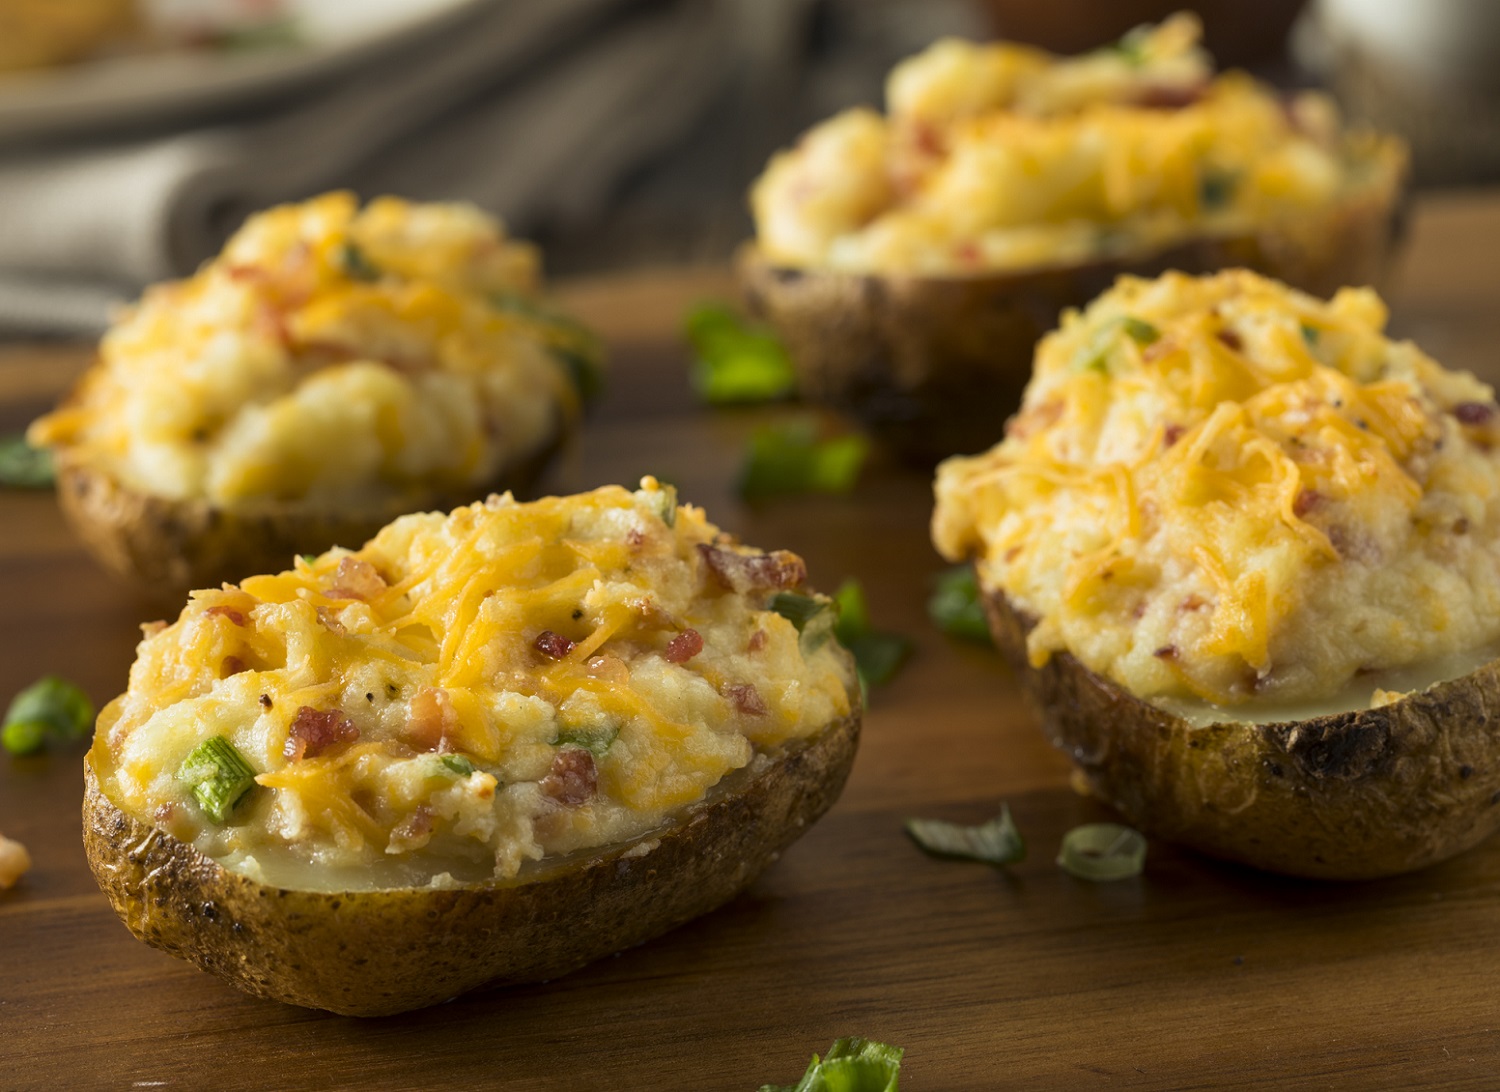 Homemade Twice Baked Potatoes with Bacon and Cheese